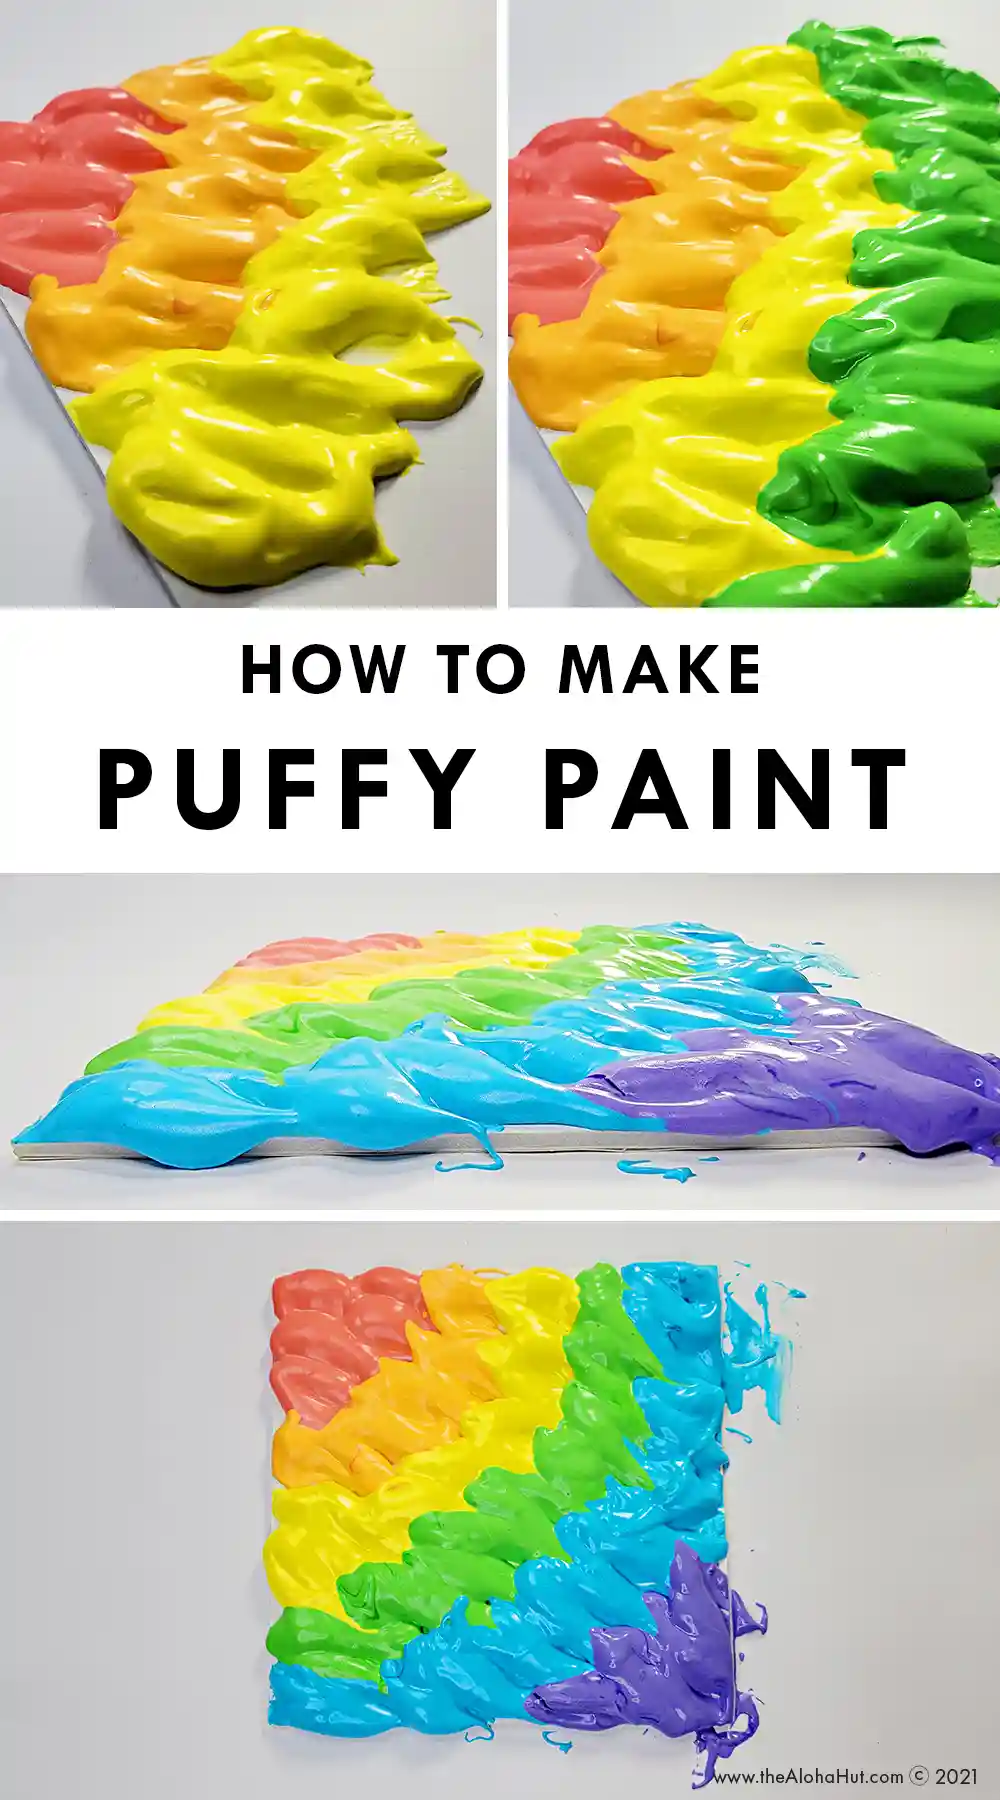 How to Make Puffy Paint?